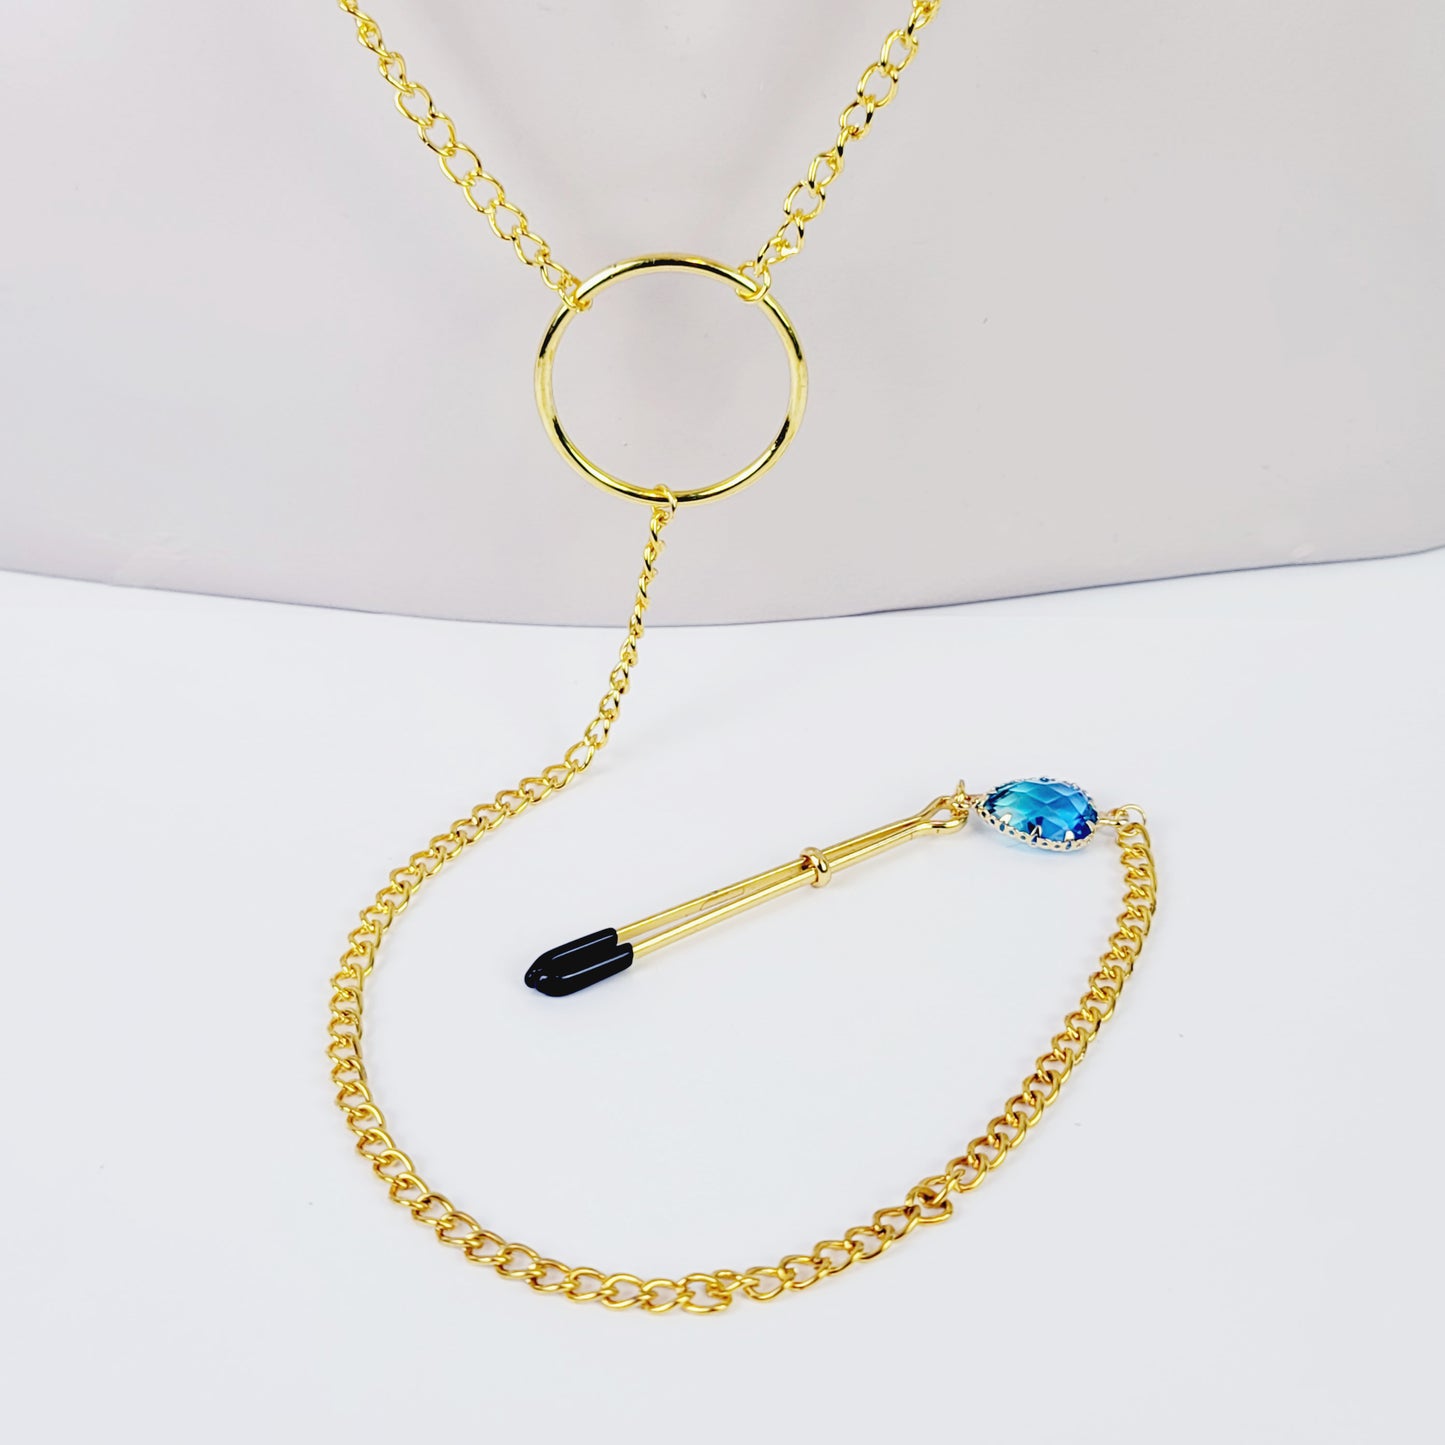 Nipple To Clit Clamps. Gold Tweezer Nipple Clamps, Chain Attached, with Tweezer Clitoral Clamp and Blue Gems. MATURE, BDSM